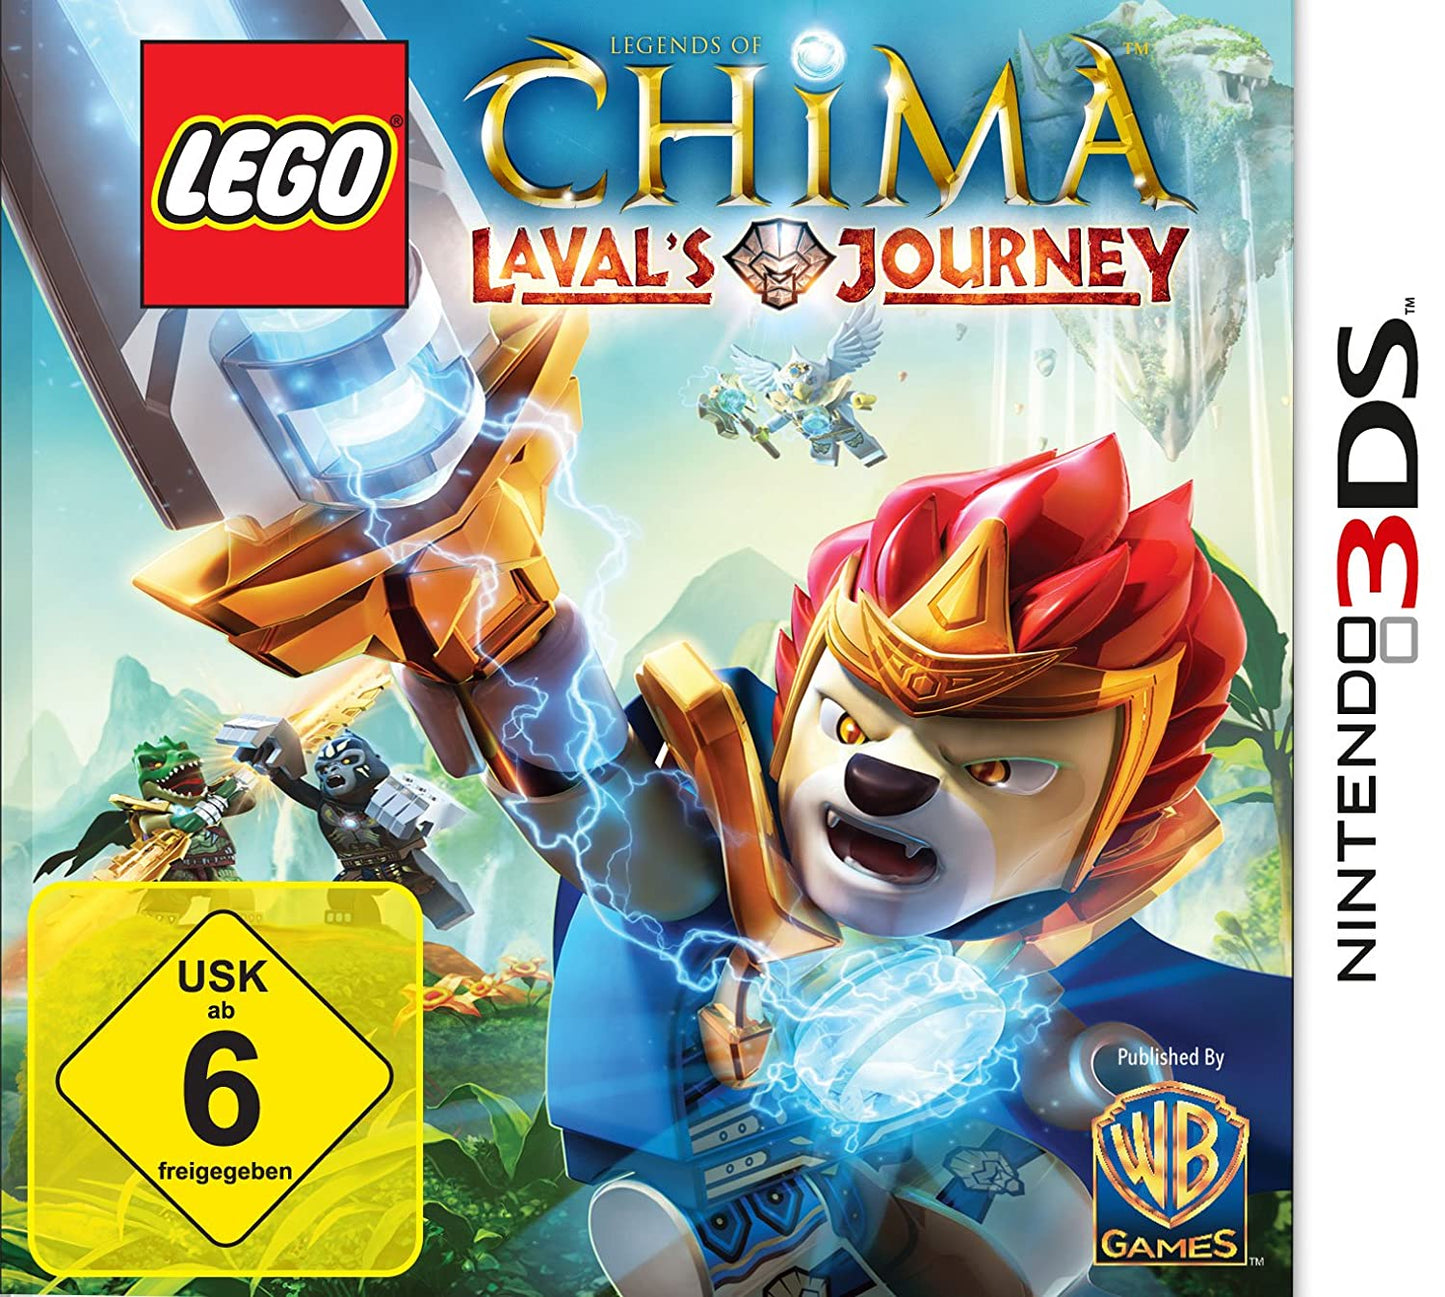 LEGO Legends of Chima - Laval's Journey